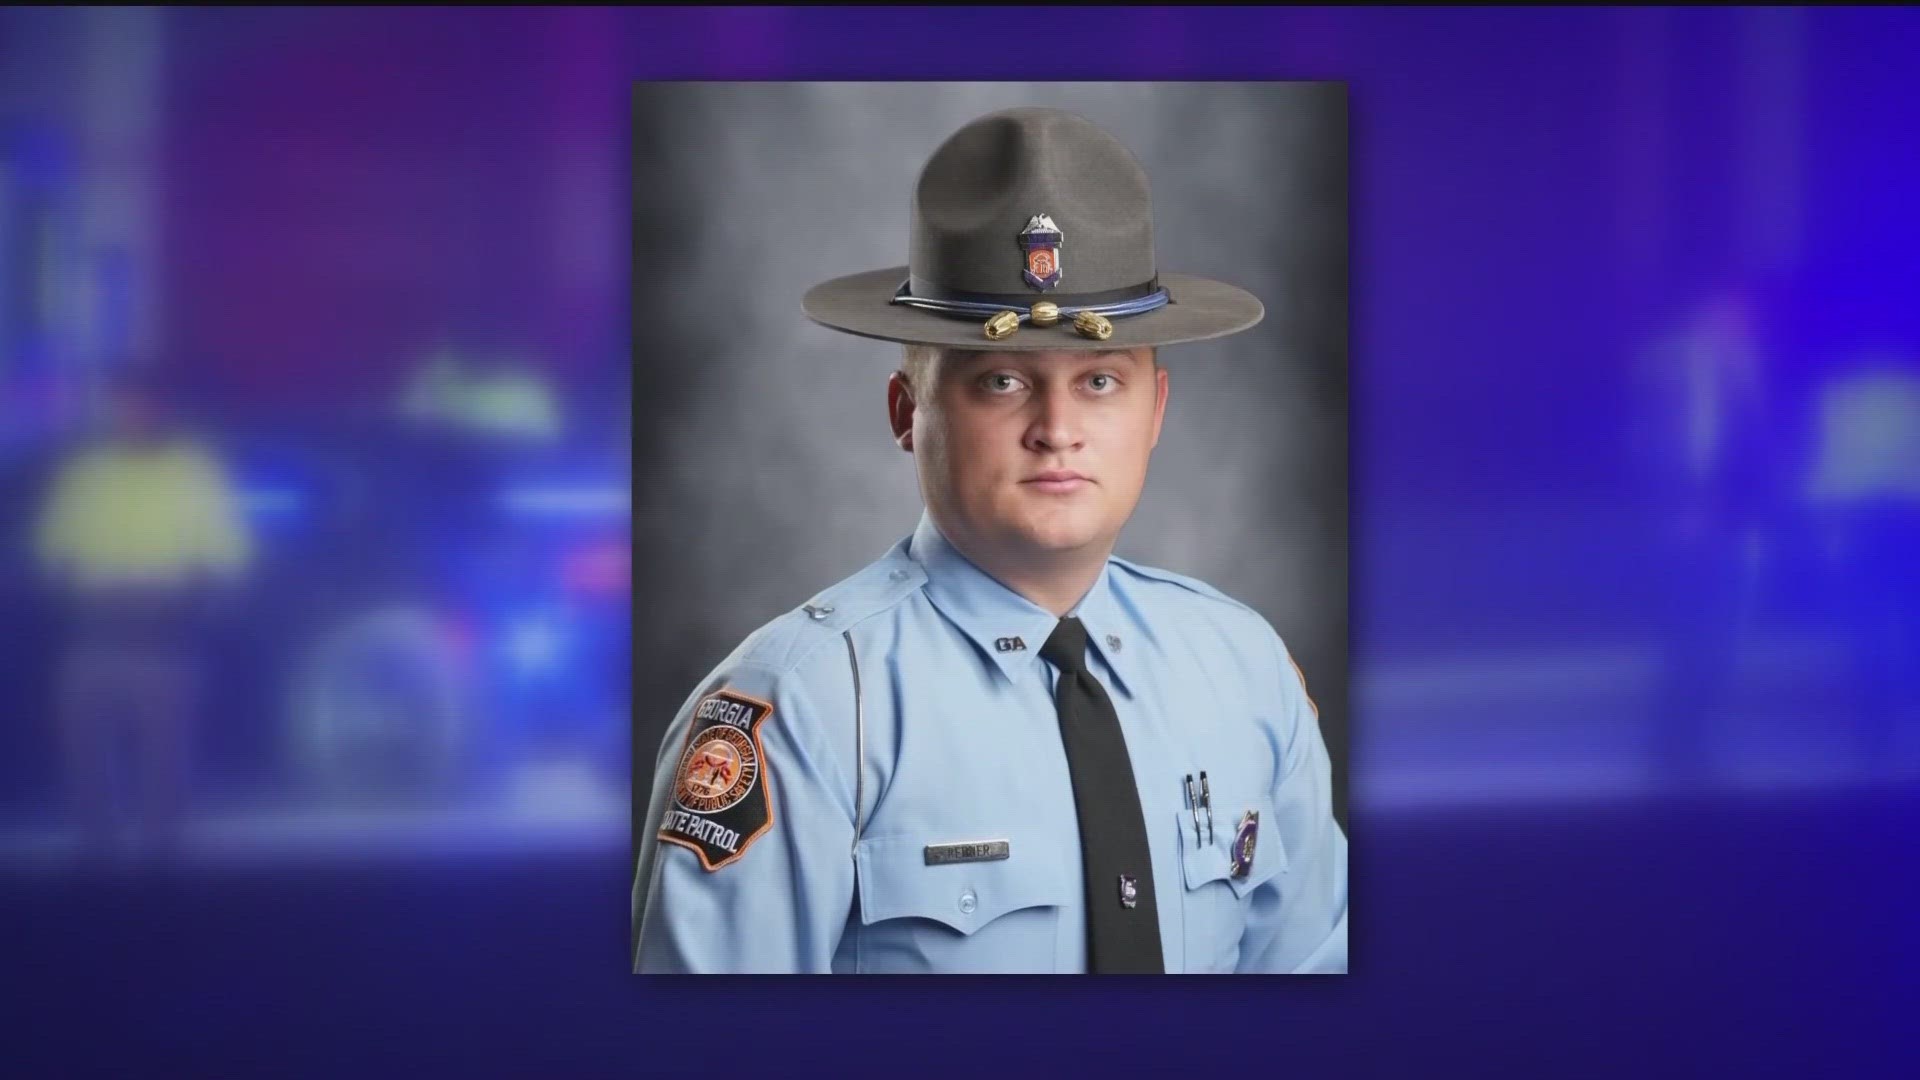 The trooper was investigating the death of the construction worker when he himself was hit.